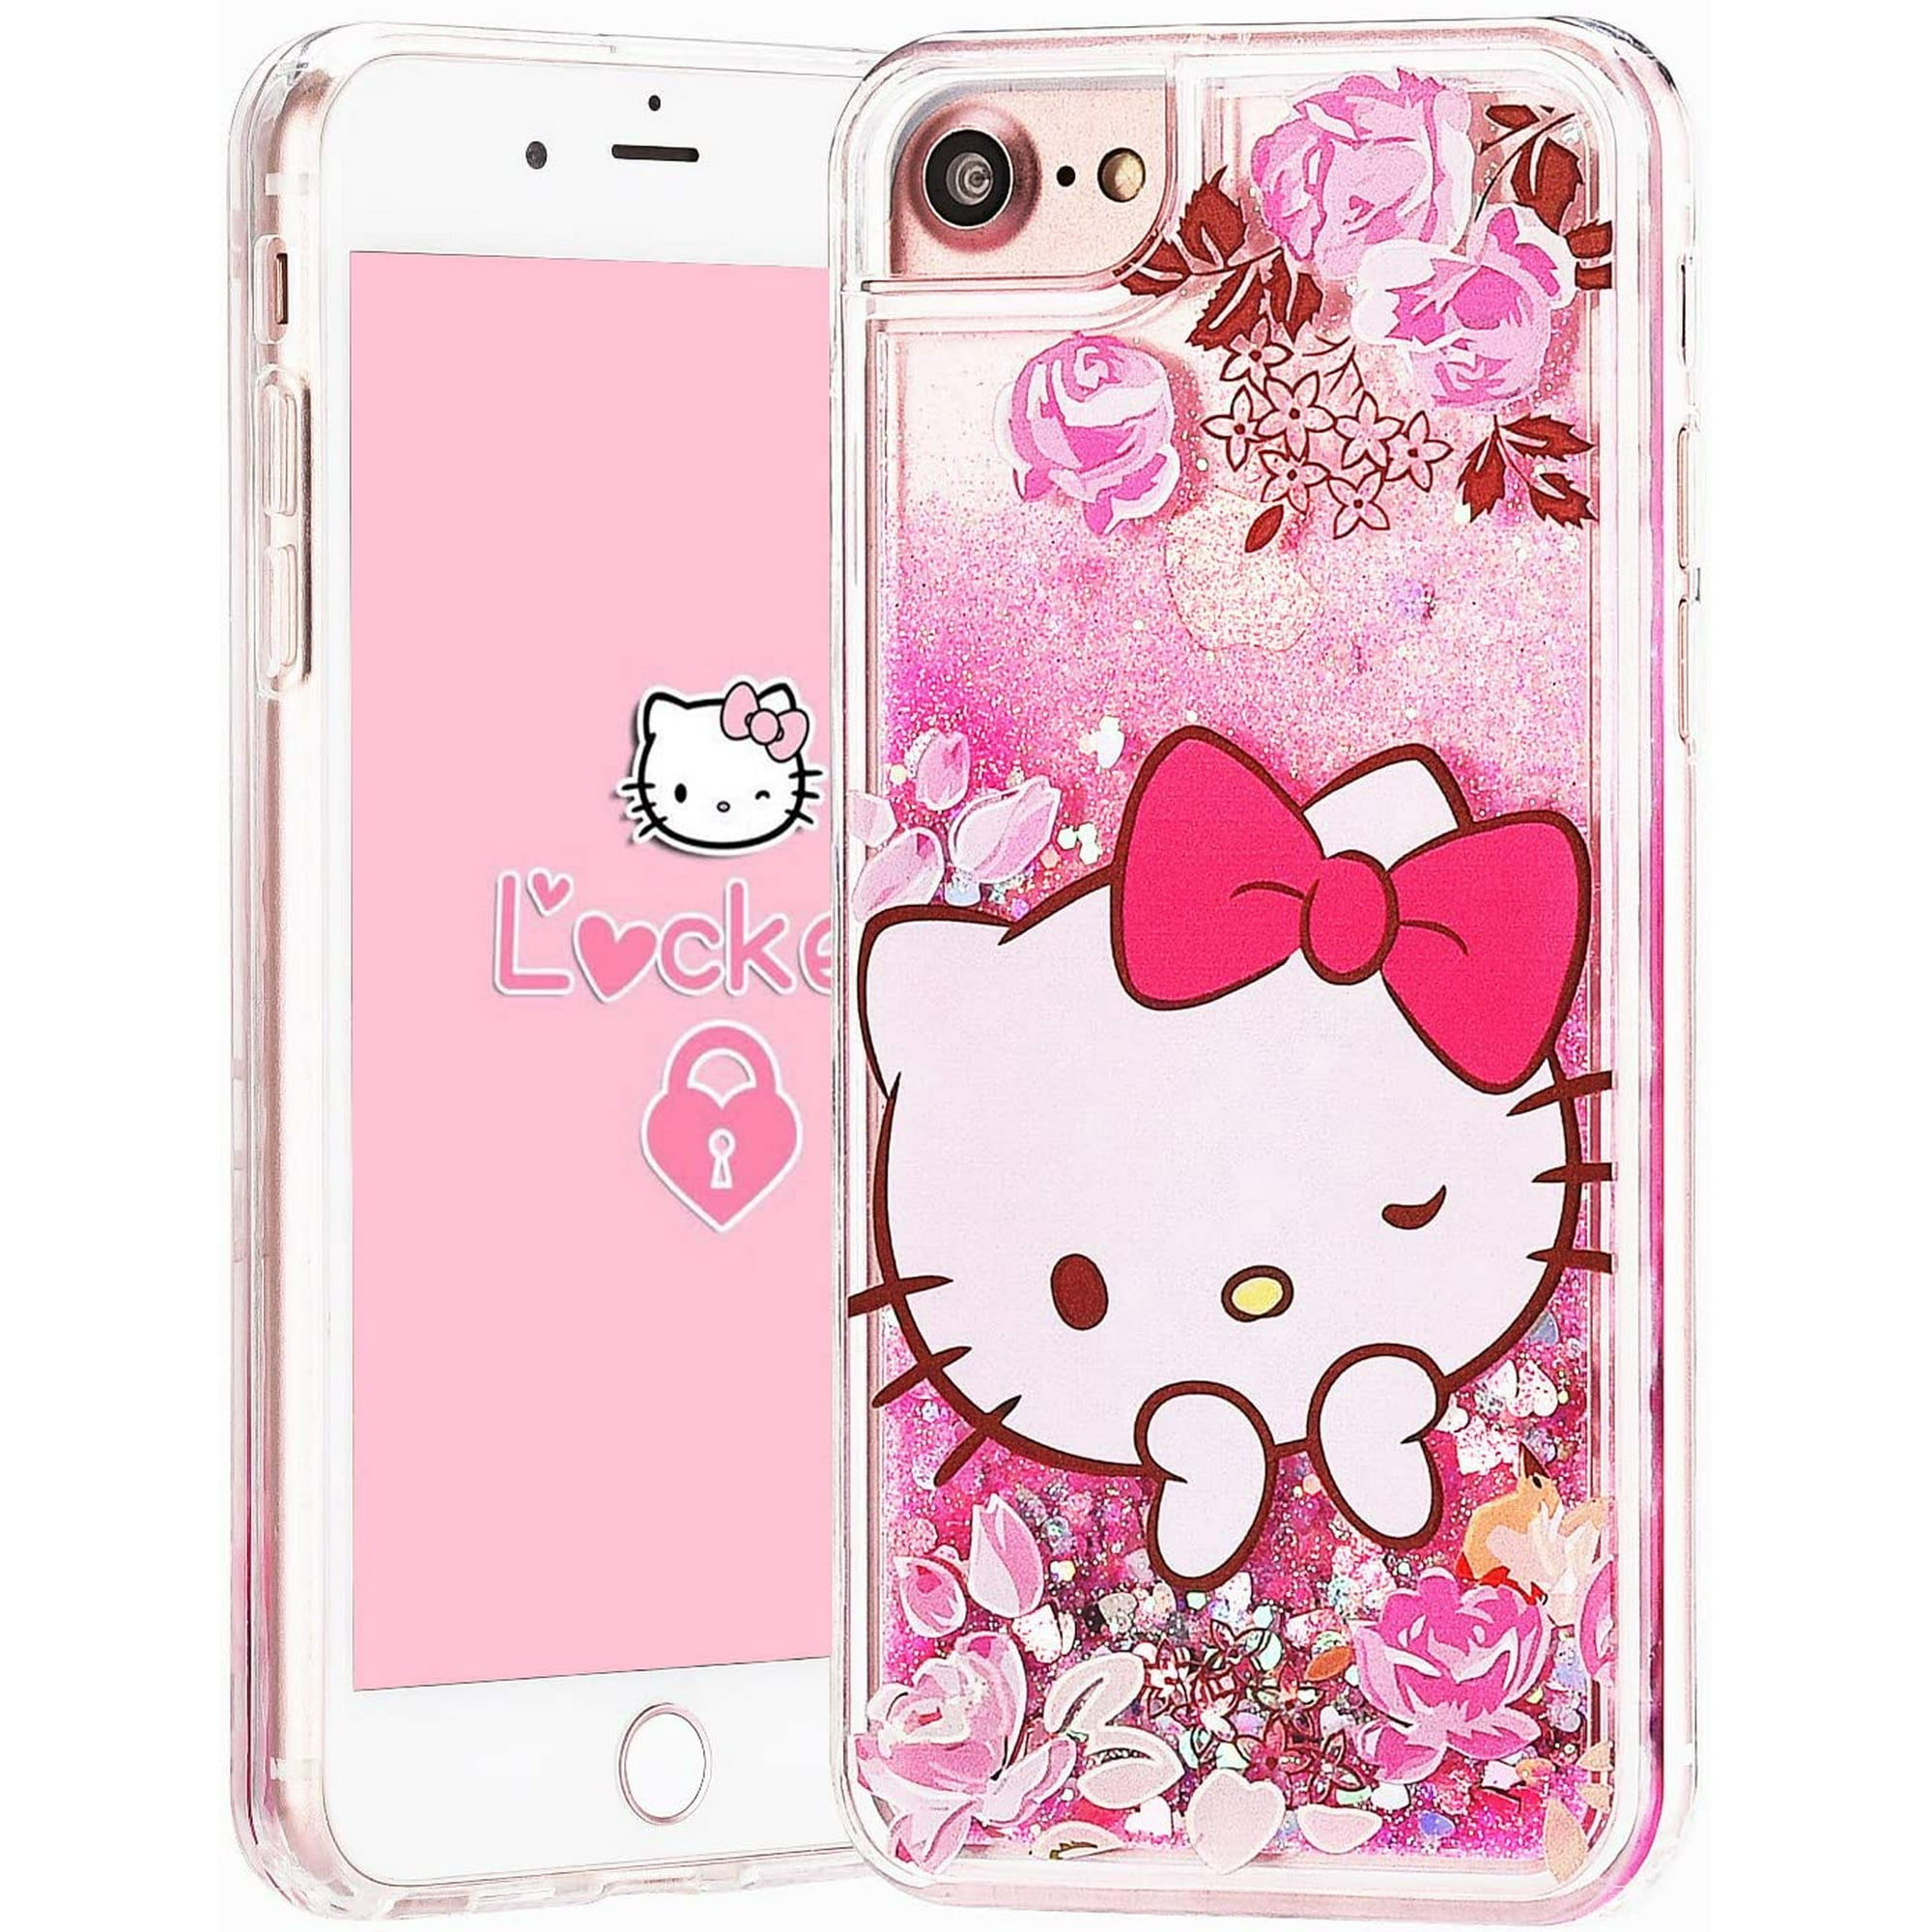 Quicksand Kitty Pink Bling Glitter Girls Case For Iphone 8 7 6 6s Iphone Se 4 7 Cute Cartoon Kawaii Animal Flowing Cover Funny Unique Character Cases For Kids Teens Women Iphone8 Se Walmart Canada